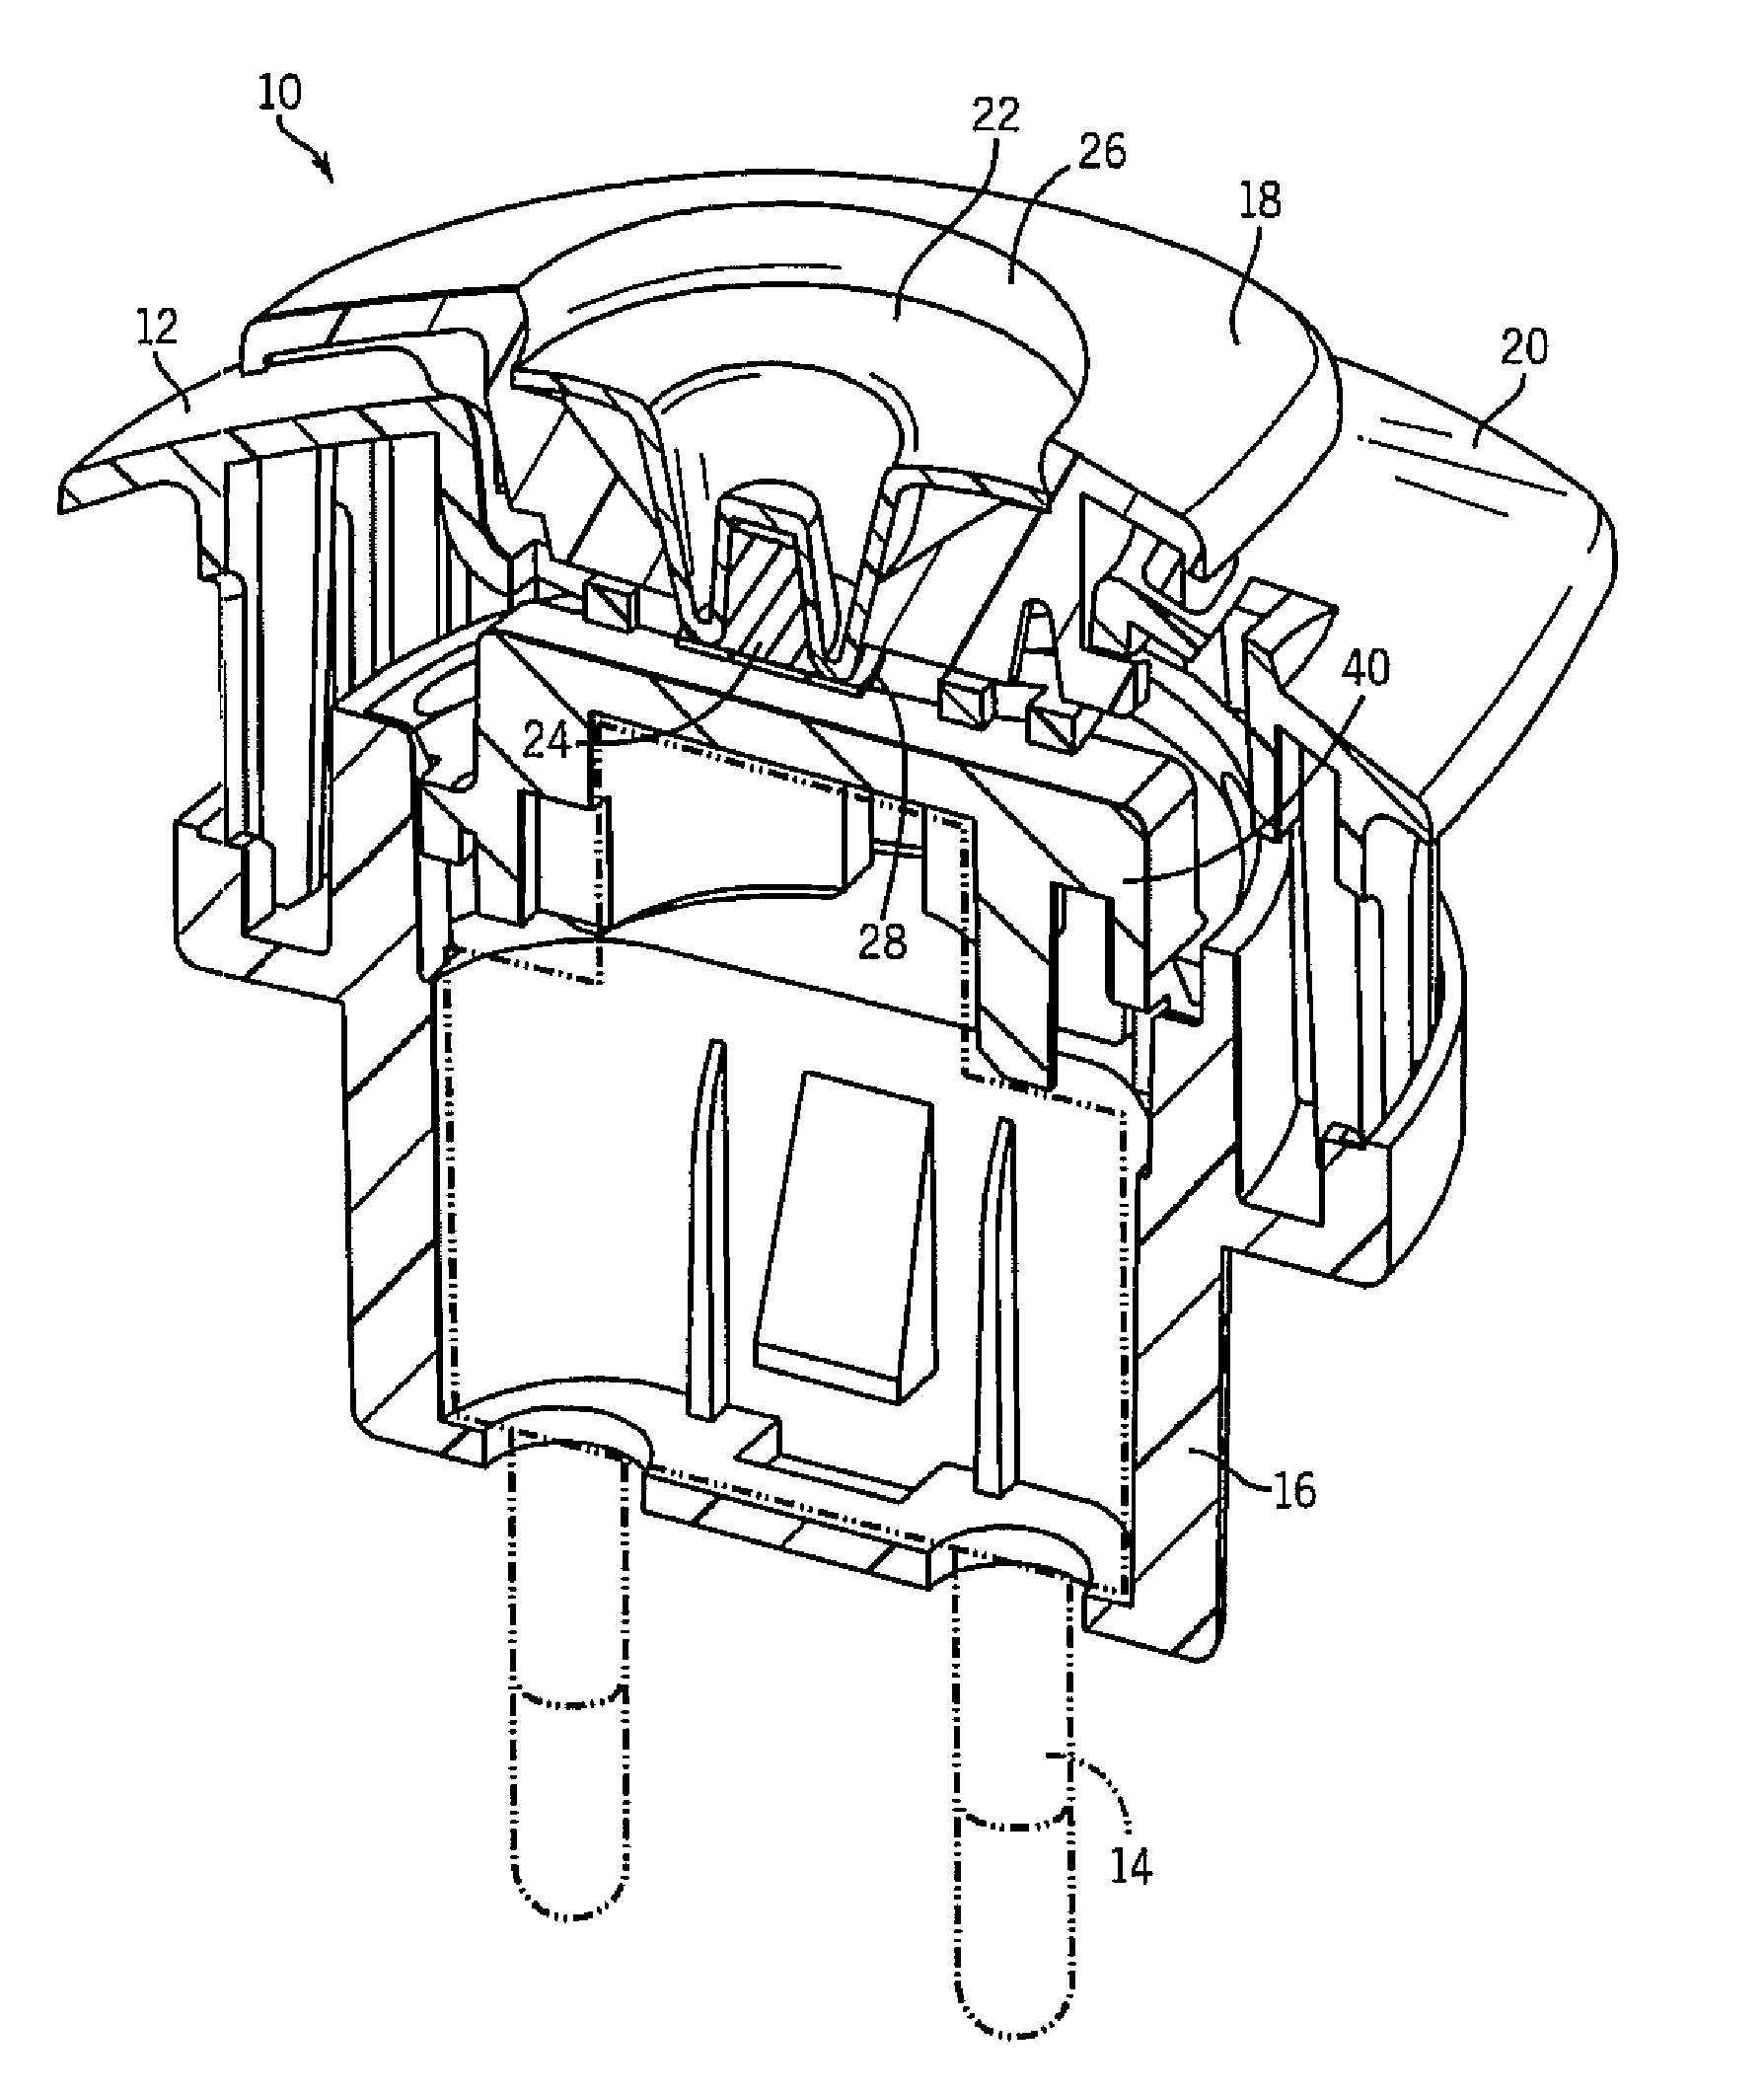 Air treatment device with reservoir refill